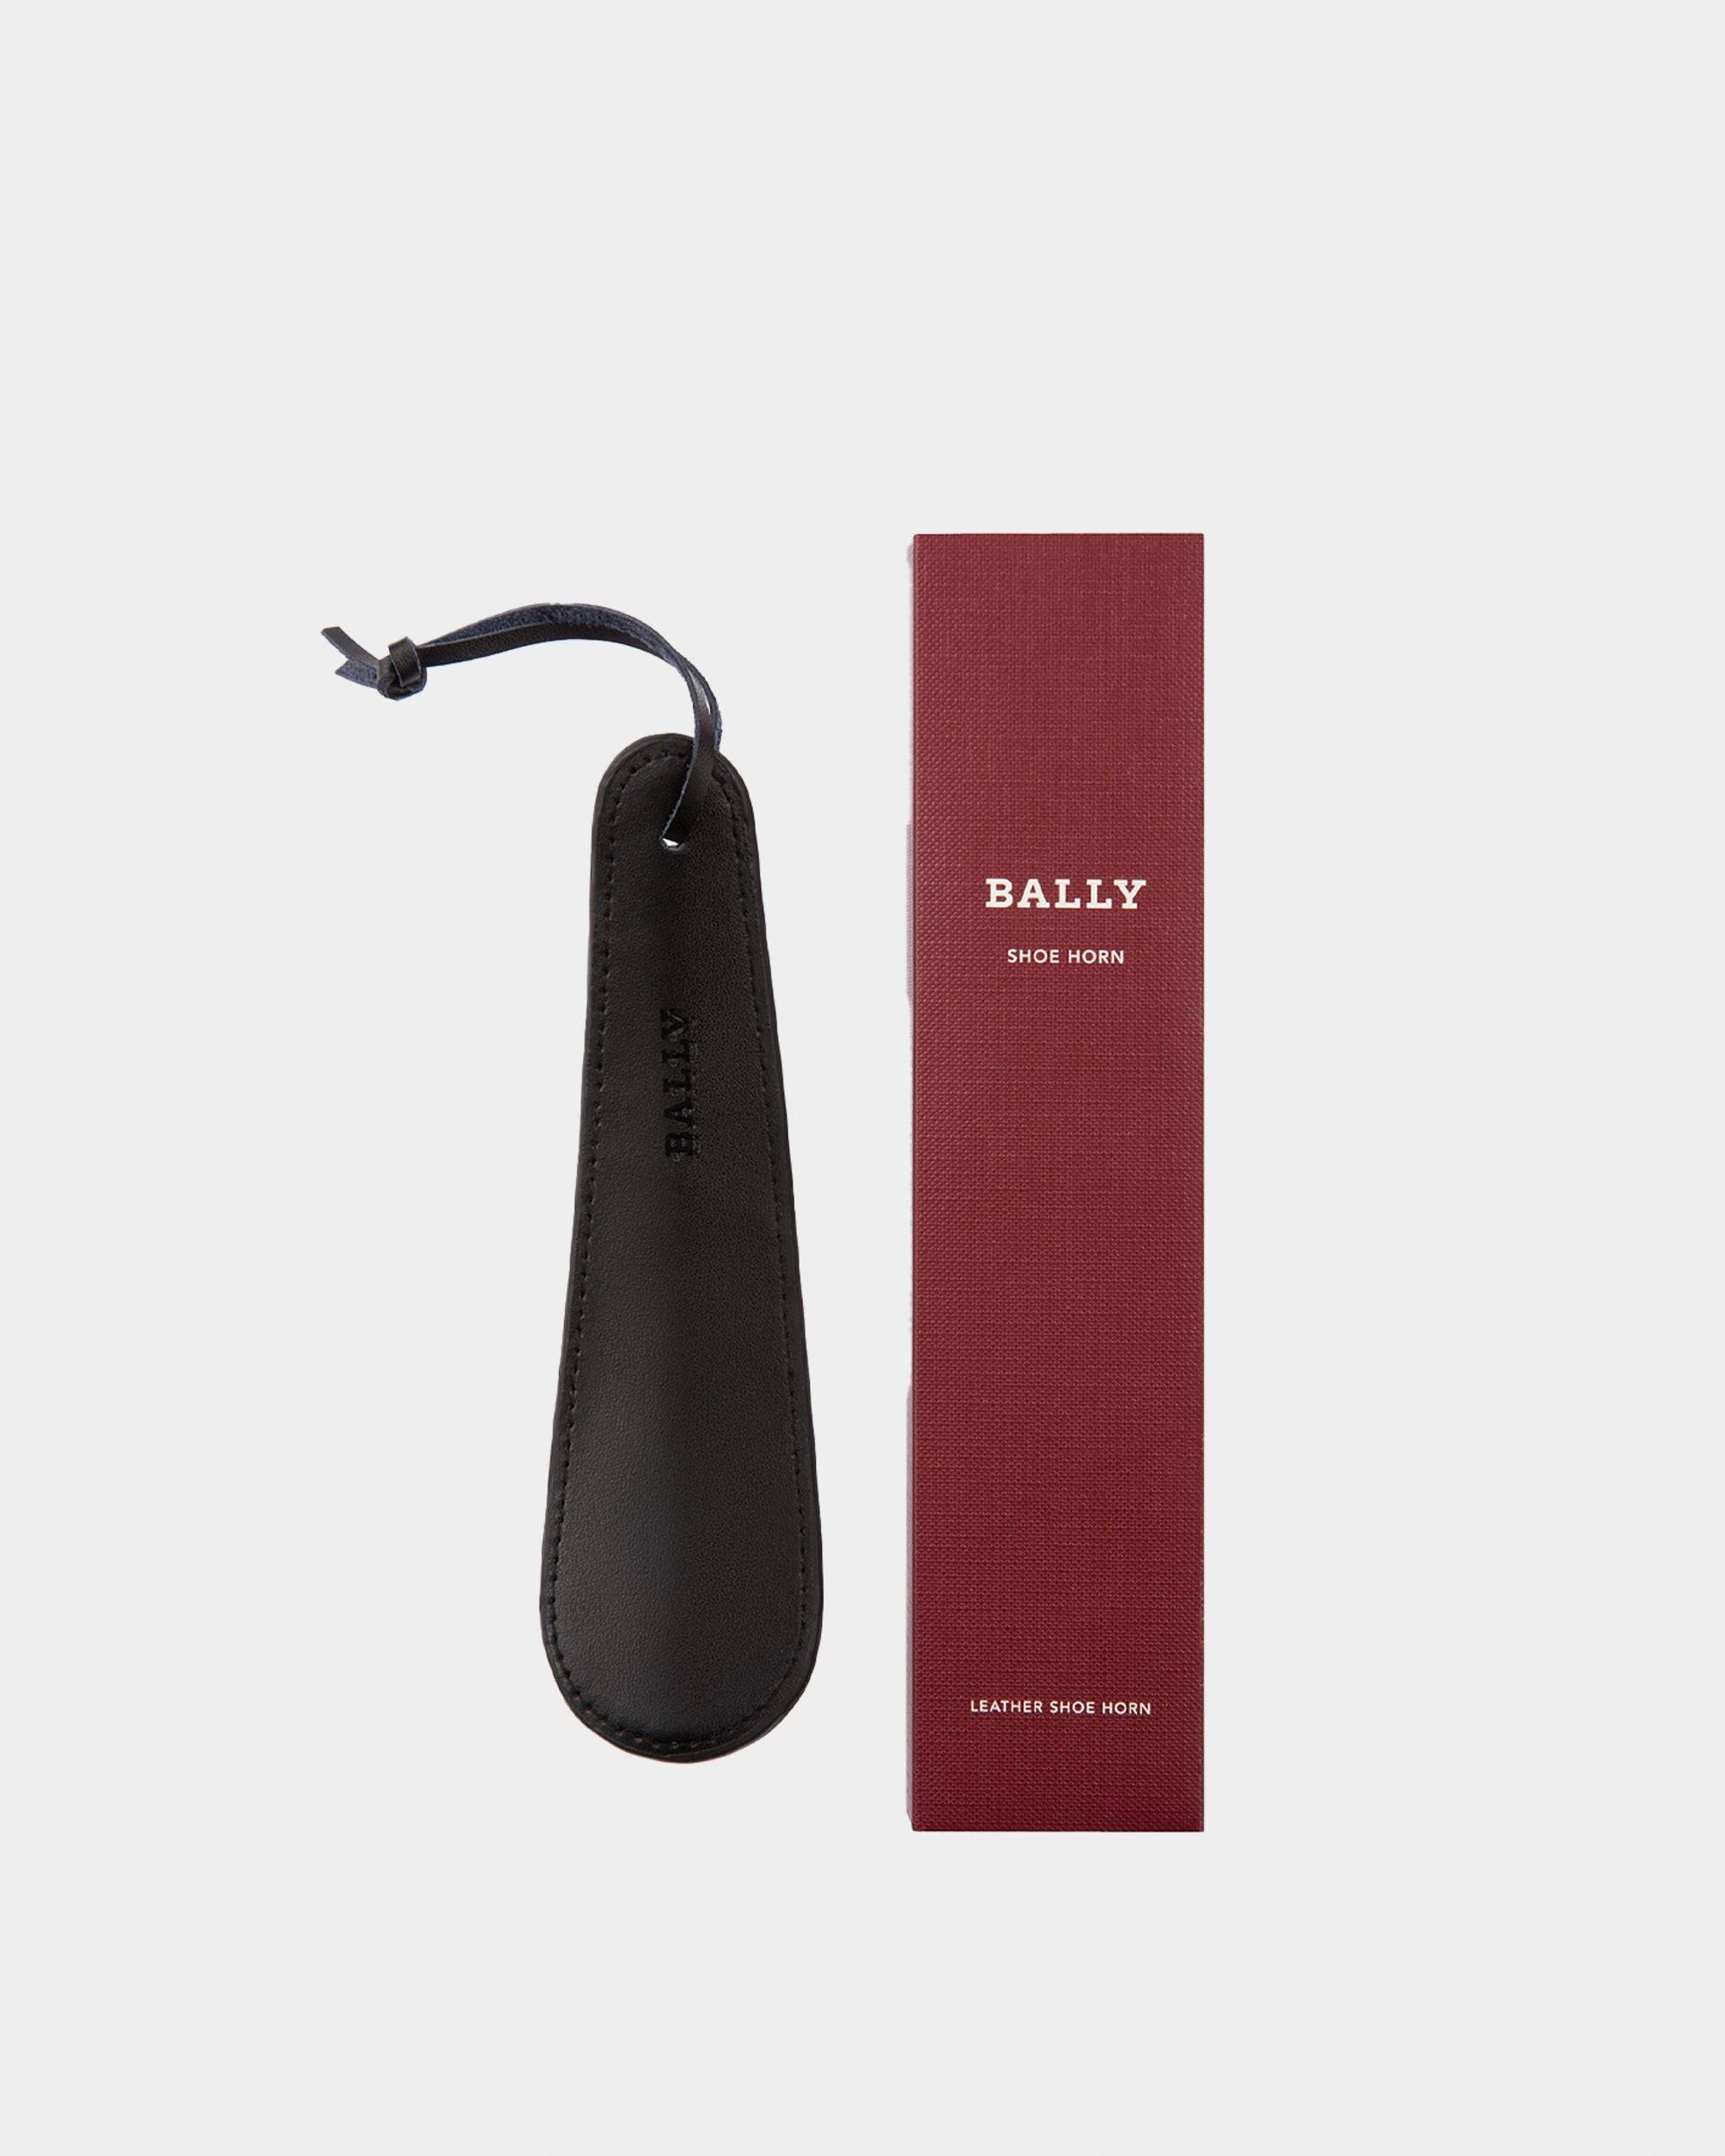 Shoehorn Shoe Care Accessory For All Shoes - Men's - Bally